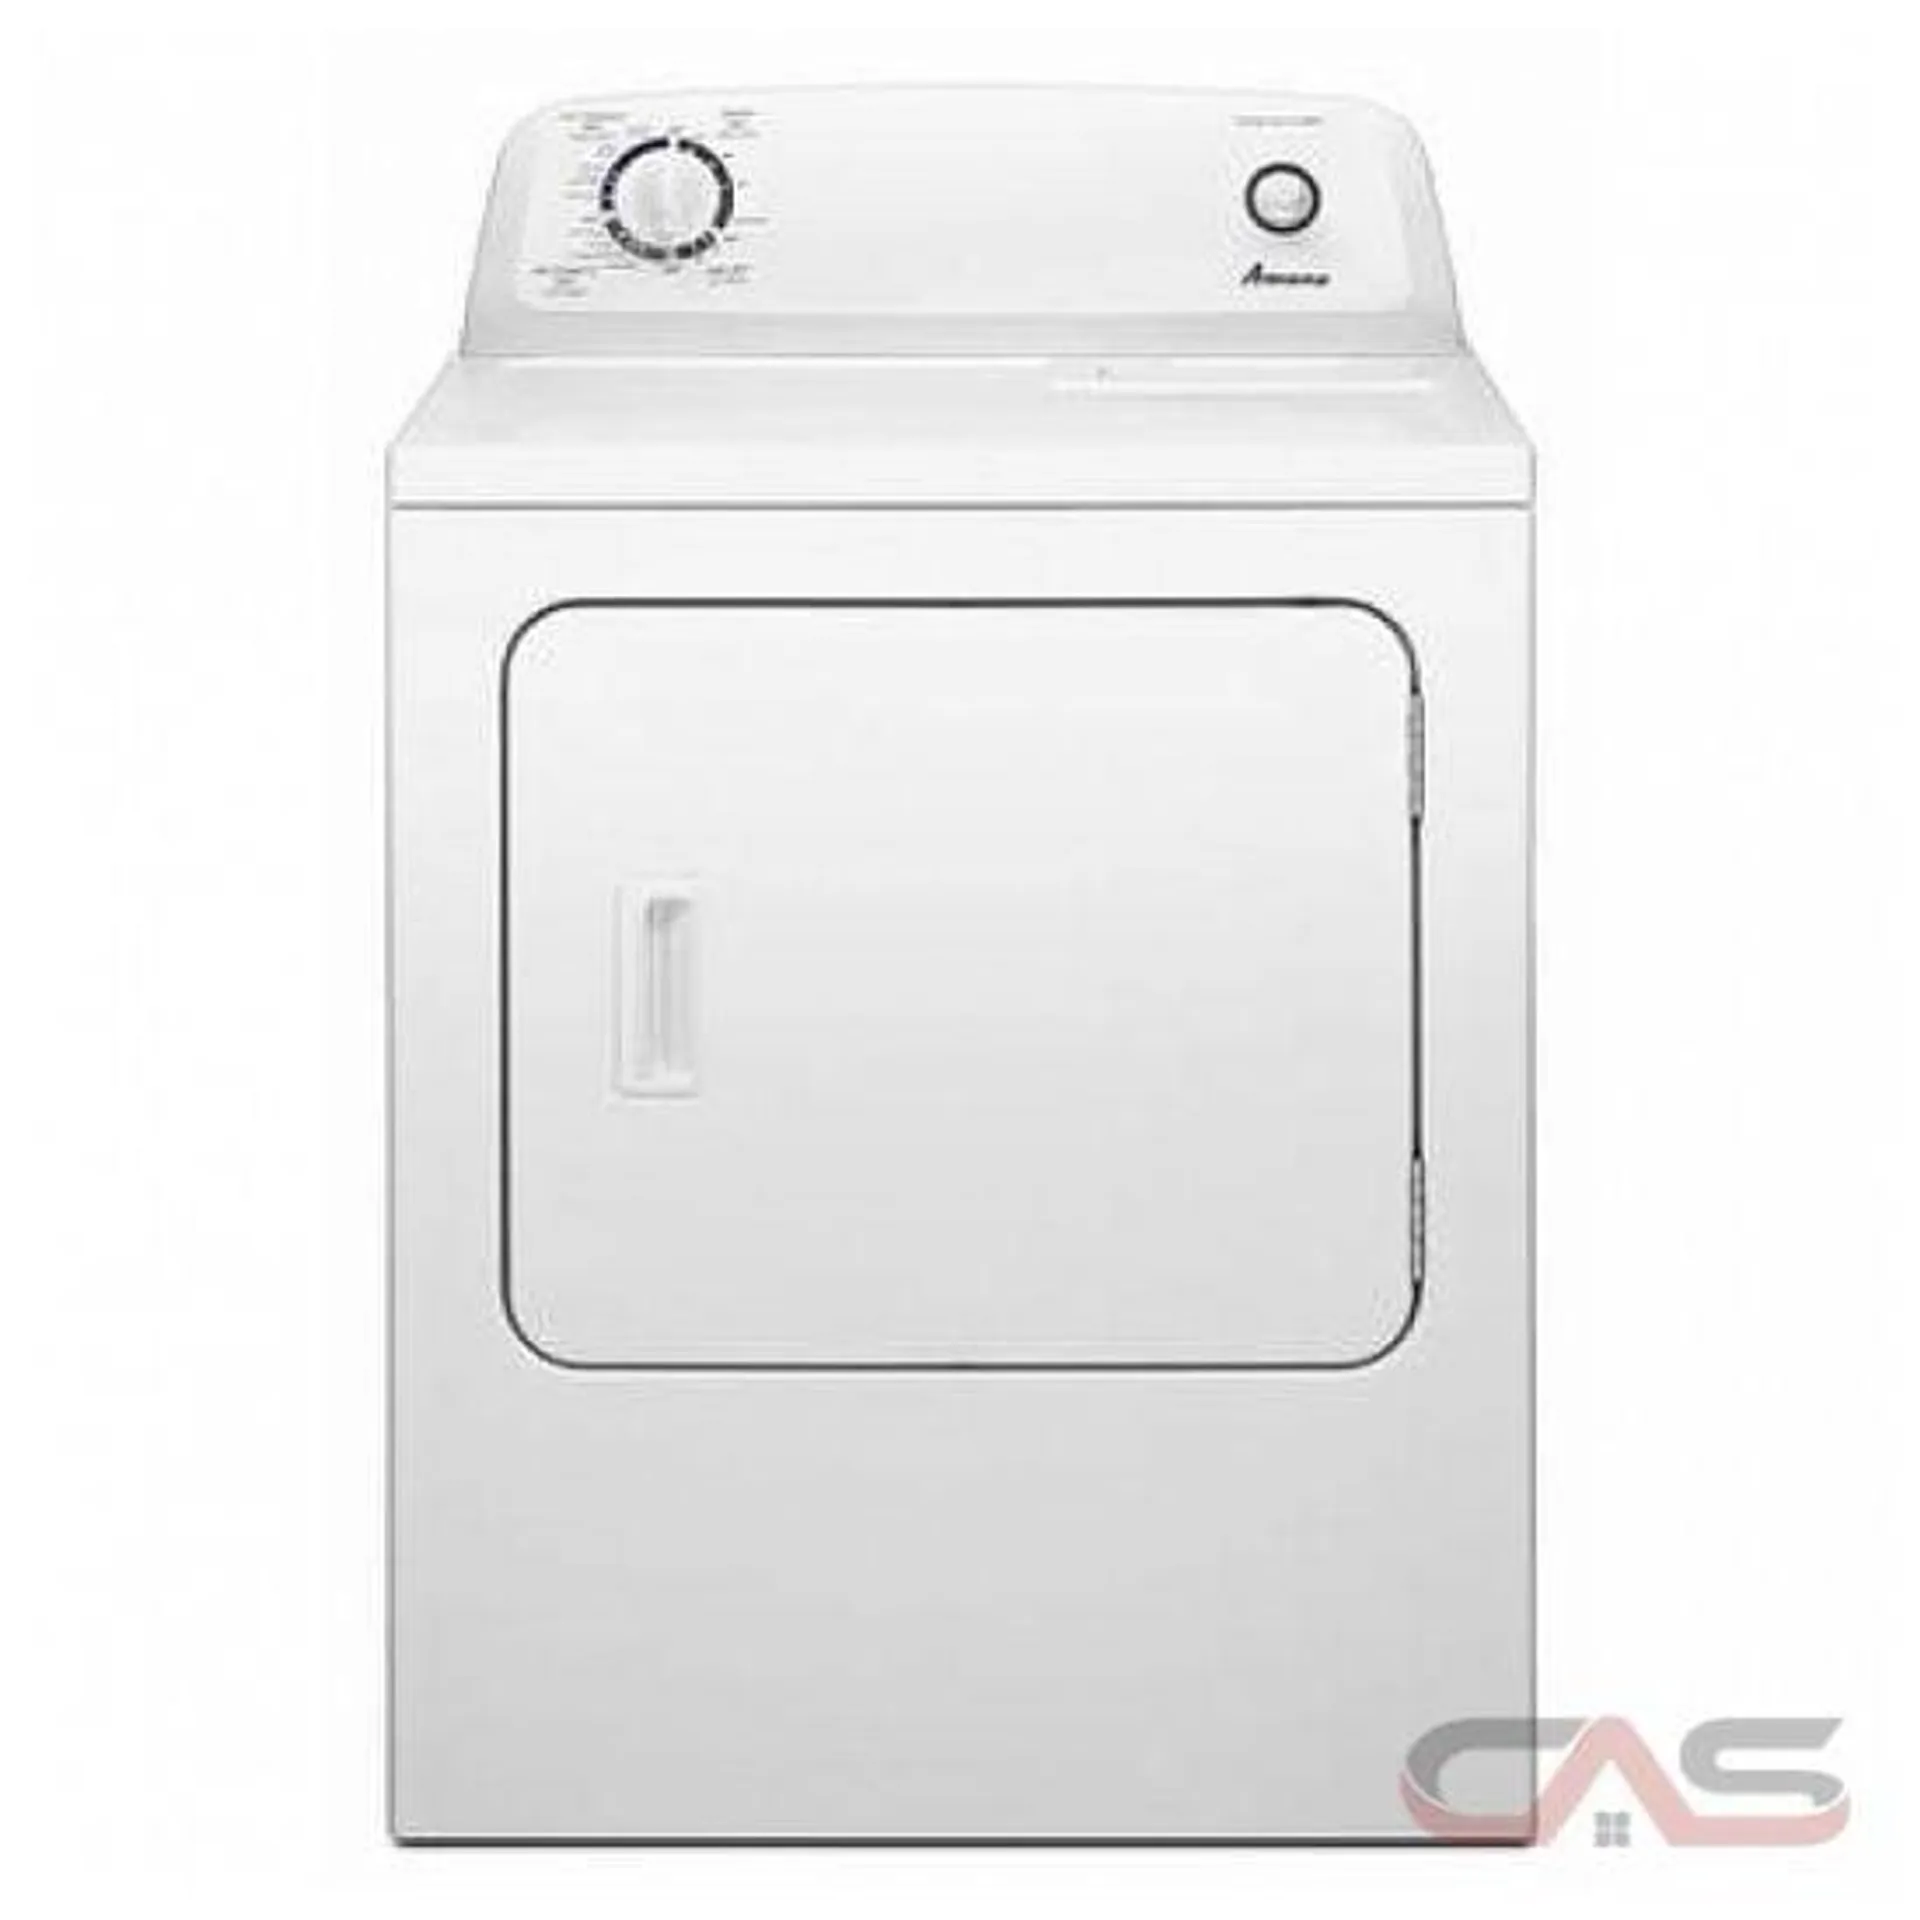 Amana YNED4655EW Dryer, 29 inch Width, Electric, 6.5 cu. ft. Capacity, 3 Temperature Settings, Steel Drum, White colour